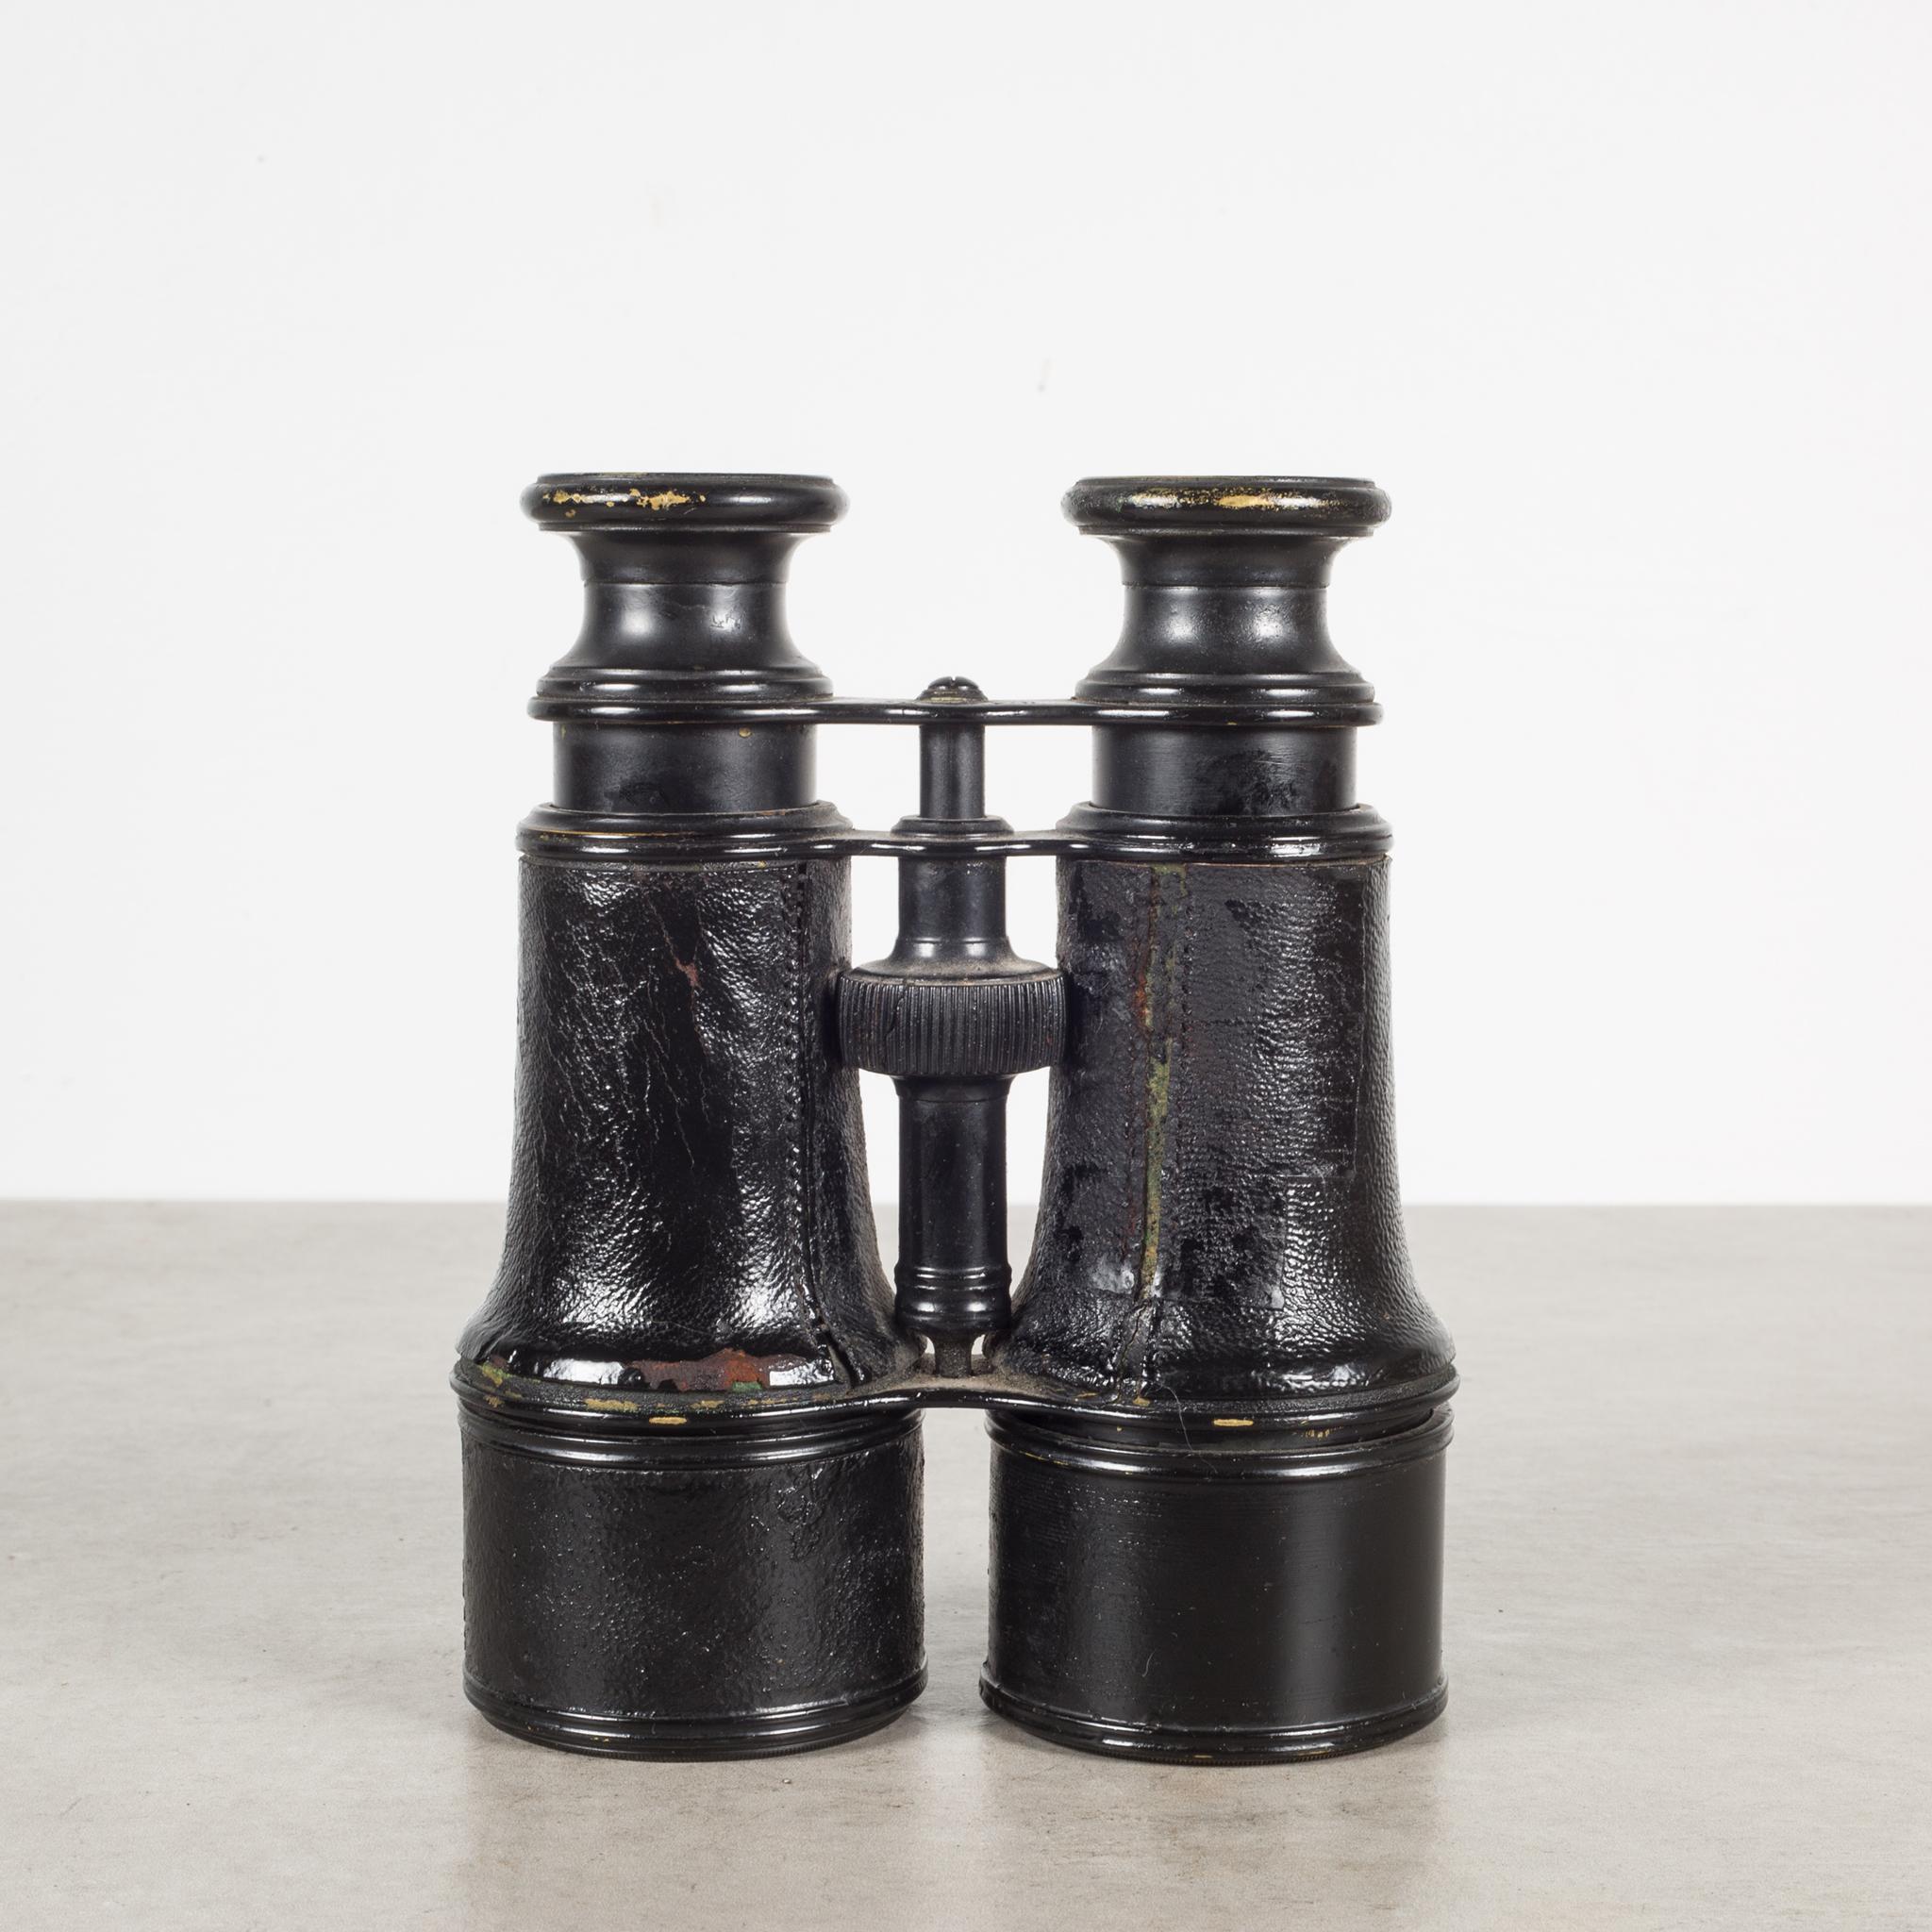 ABOUT

This is an original pair of leather wrapped expandable binoculars. 